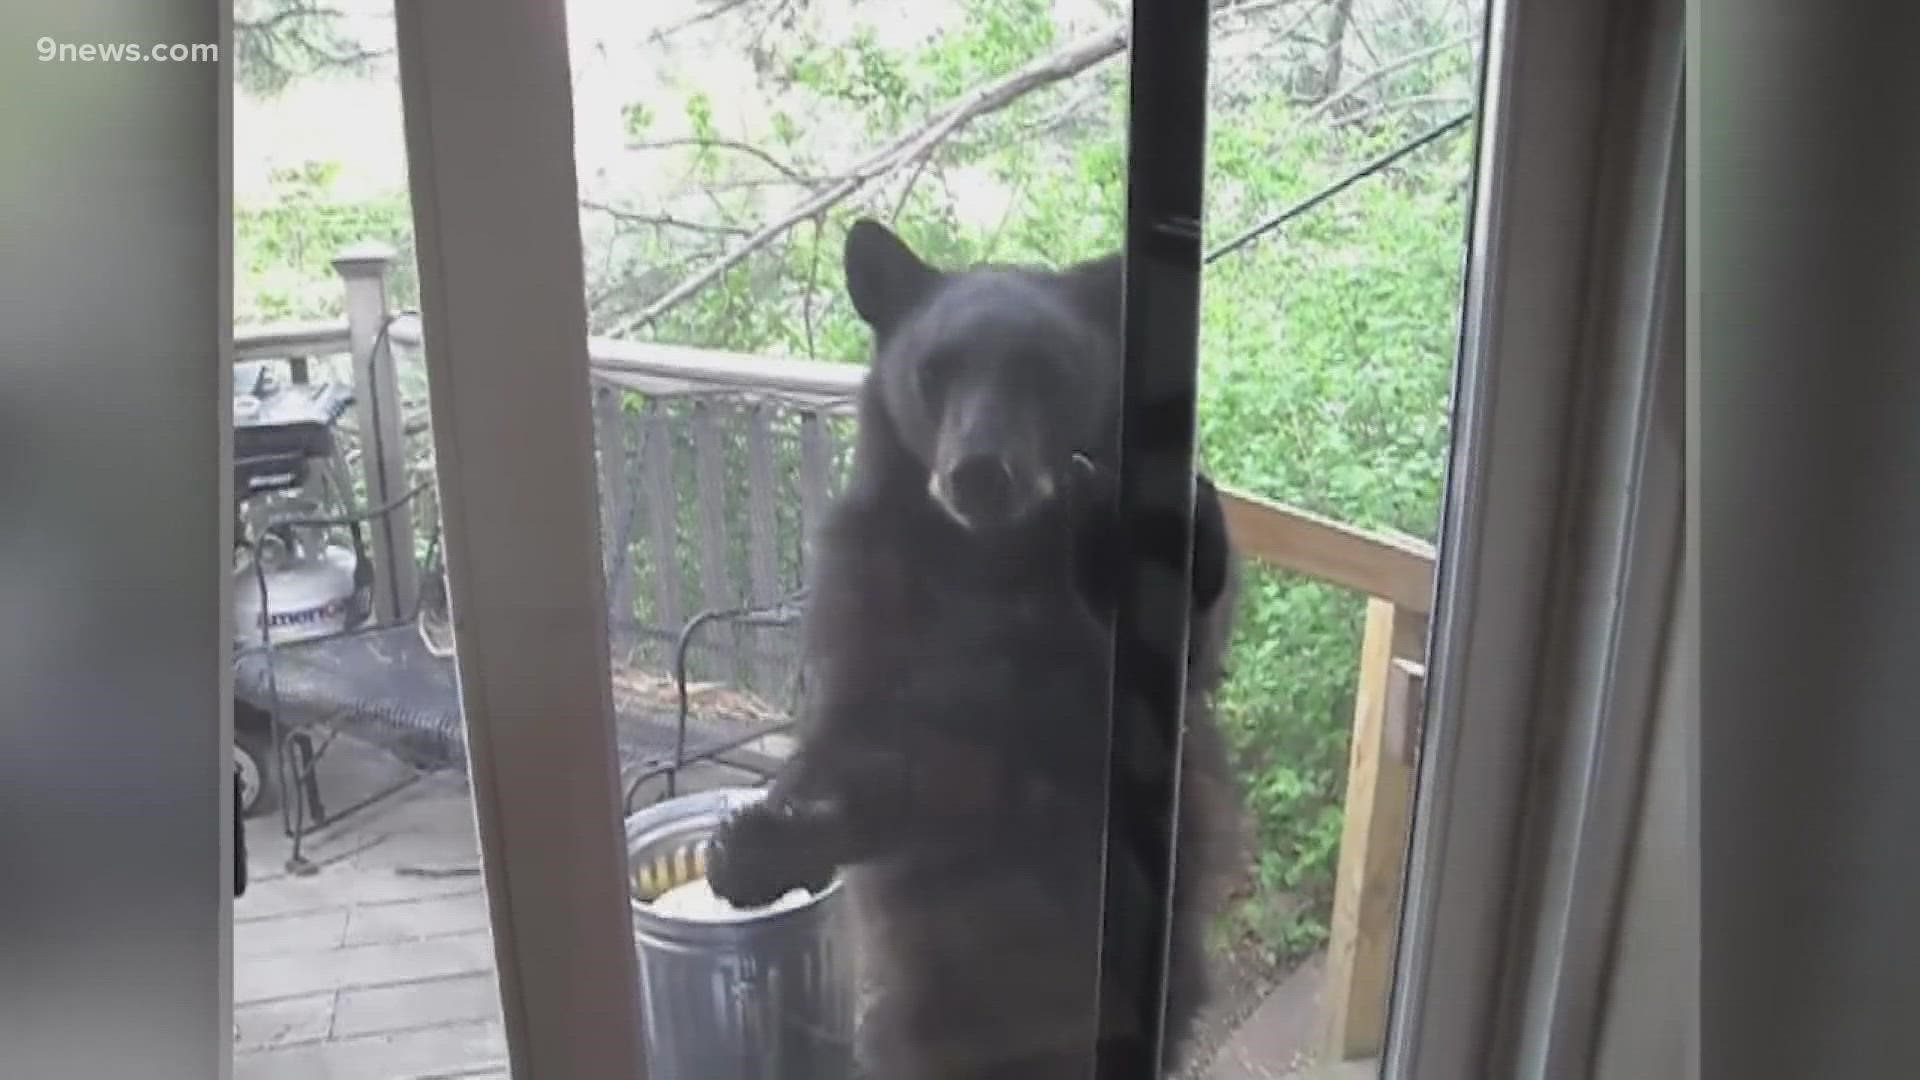 Only one Colorado newscast talked to bears about their humans problem.